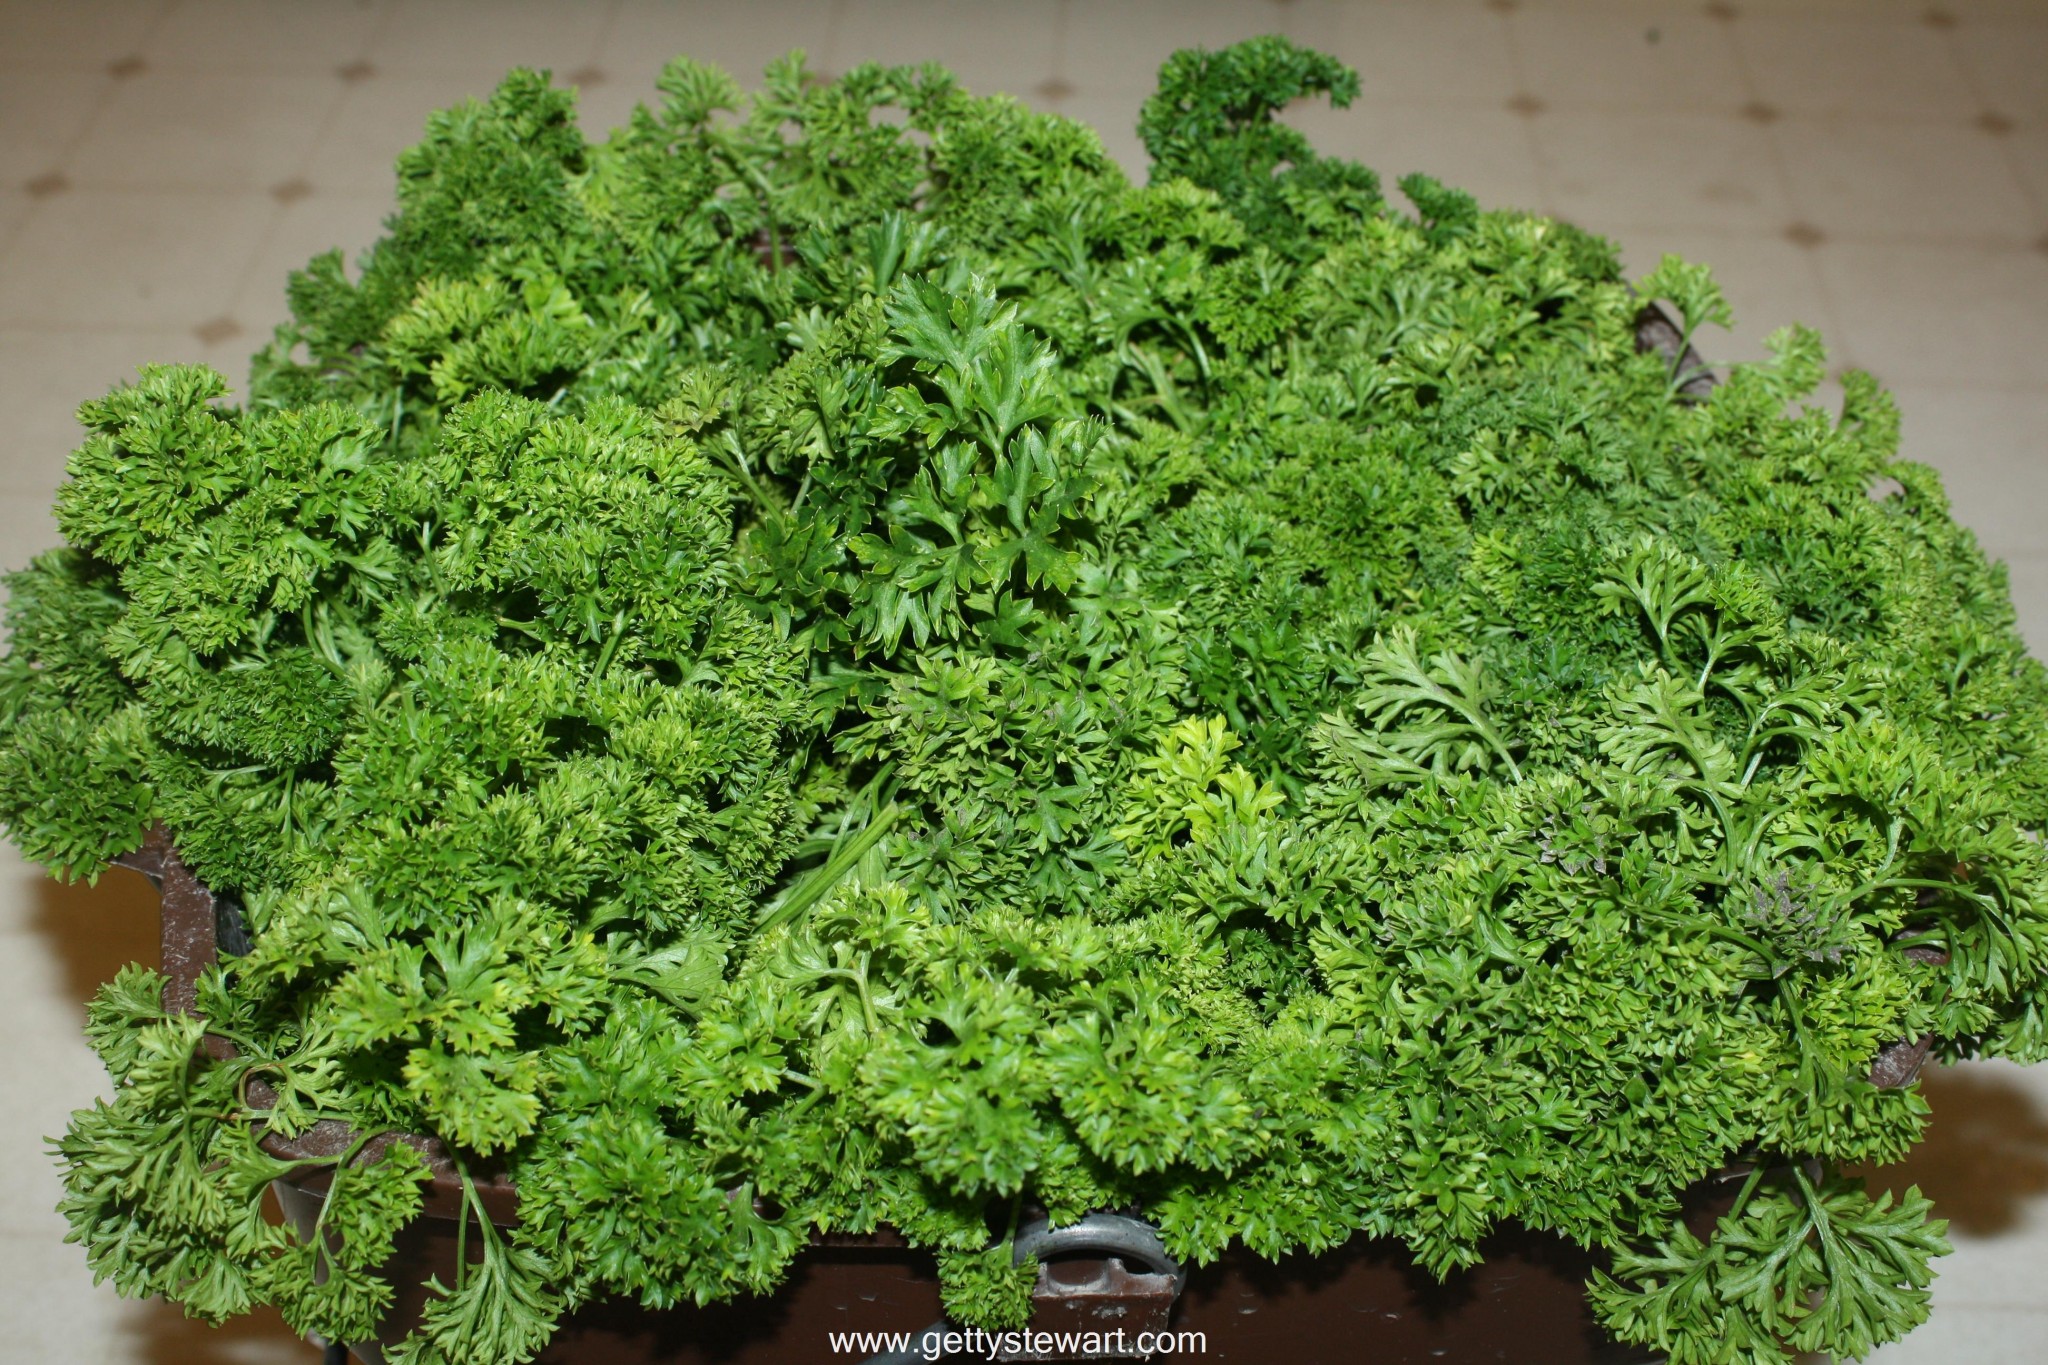 What are are some good uses for parsley?